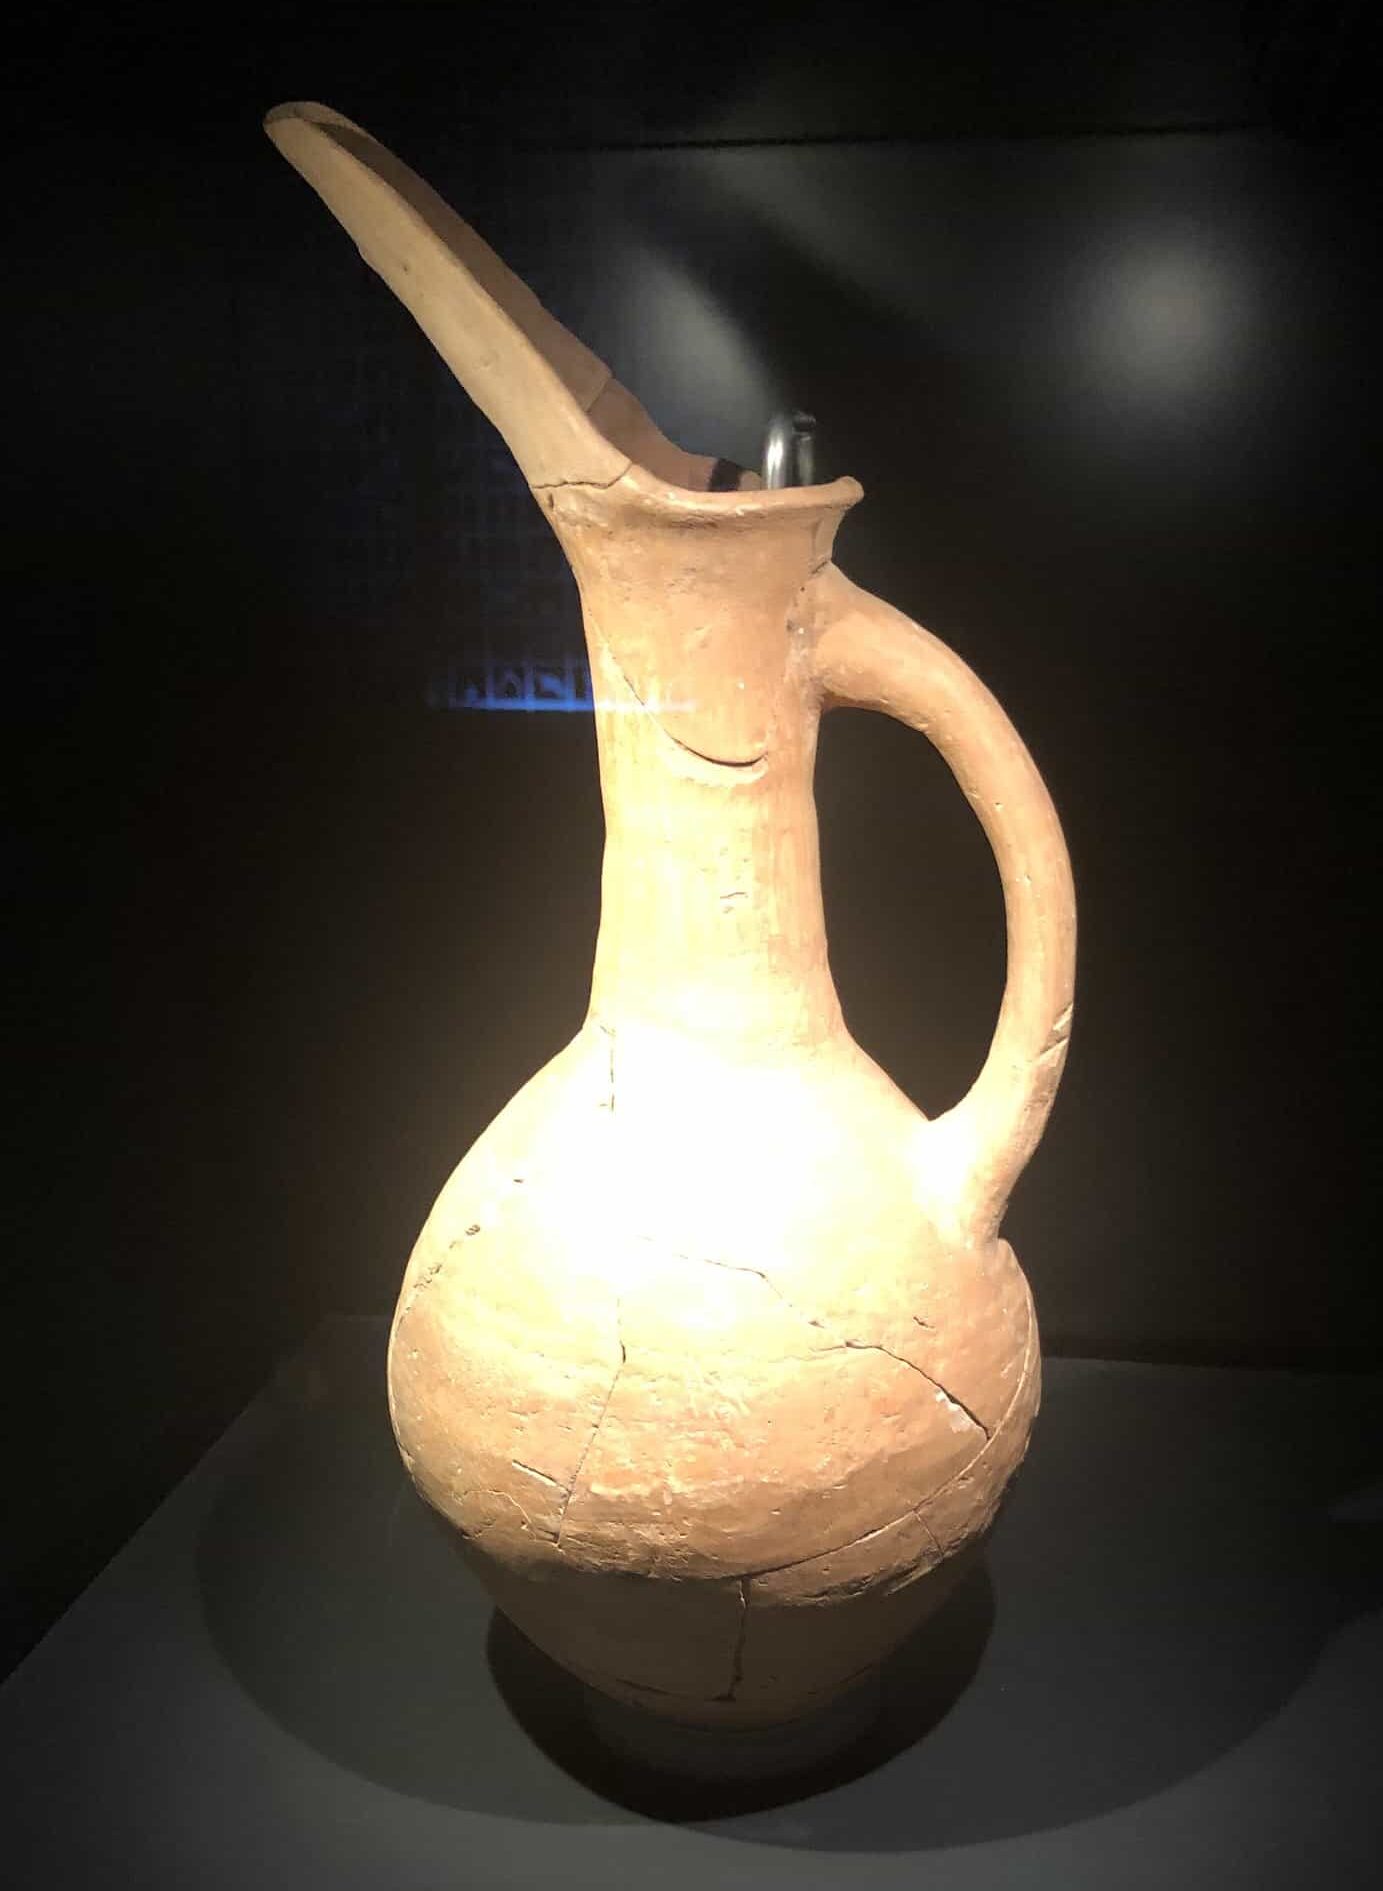 Beak spouted jug; terracotta; early Bronze Age; Troy III at the Istanbul Archaeology Museum in Istanbul, Turkey